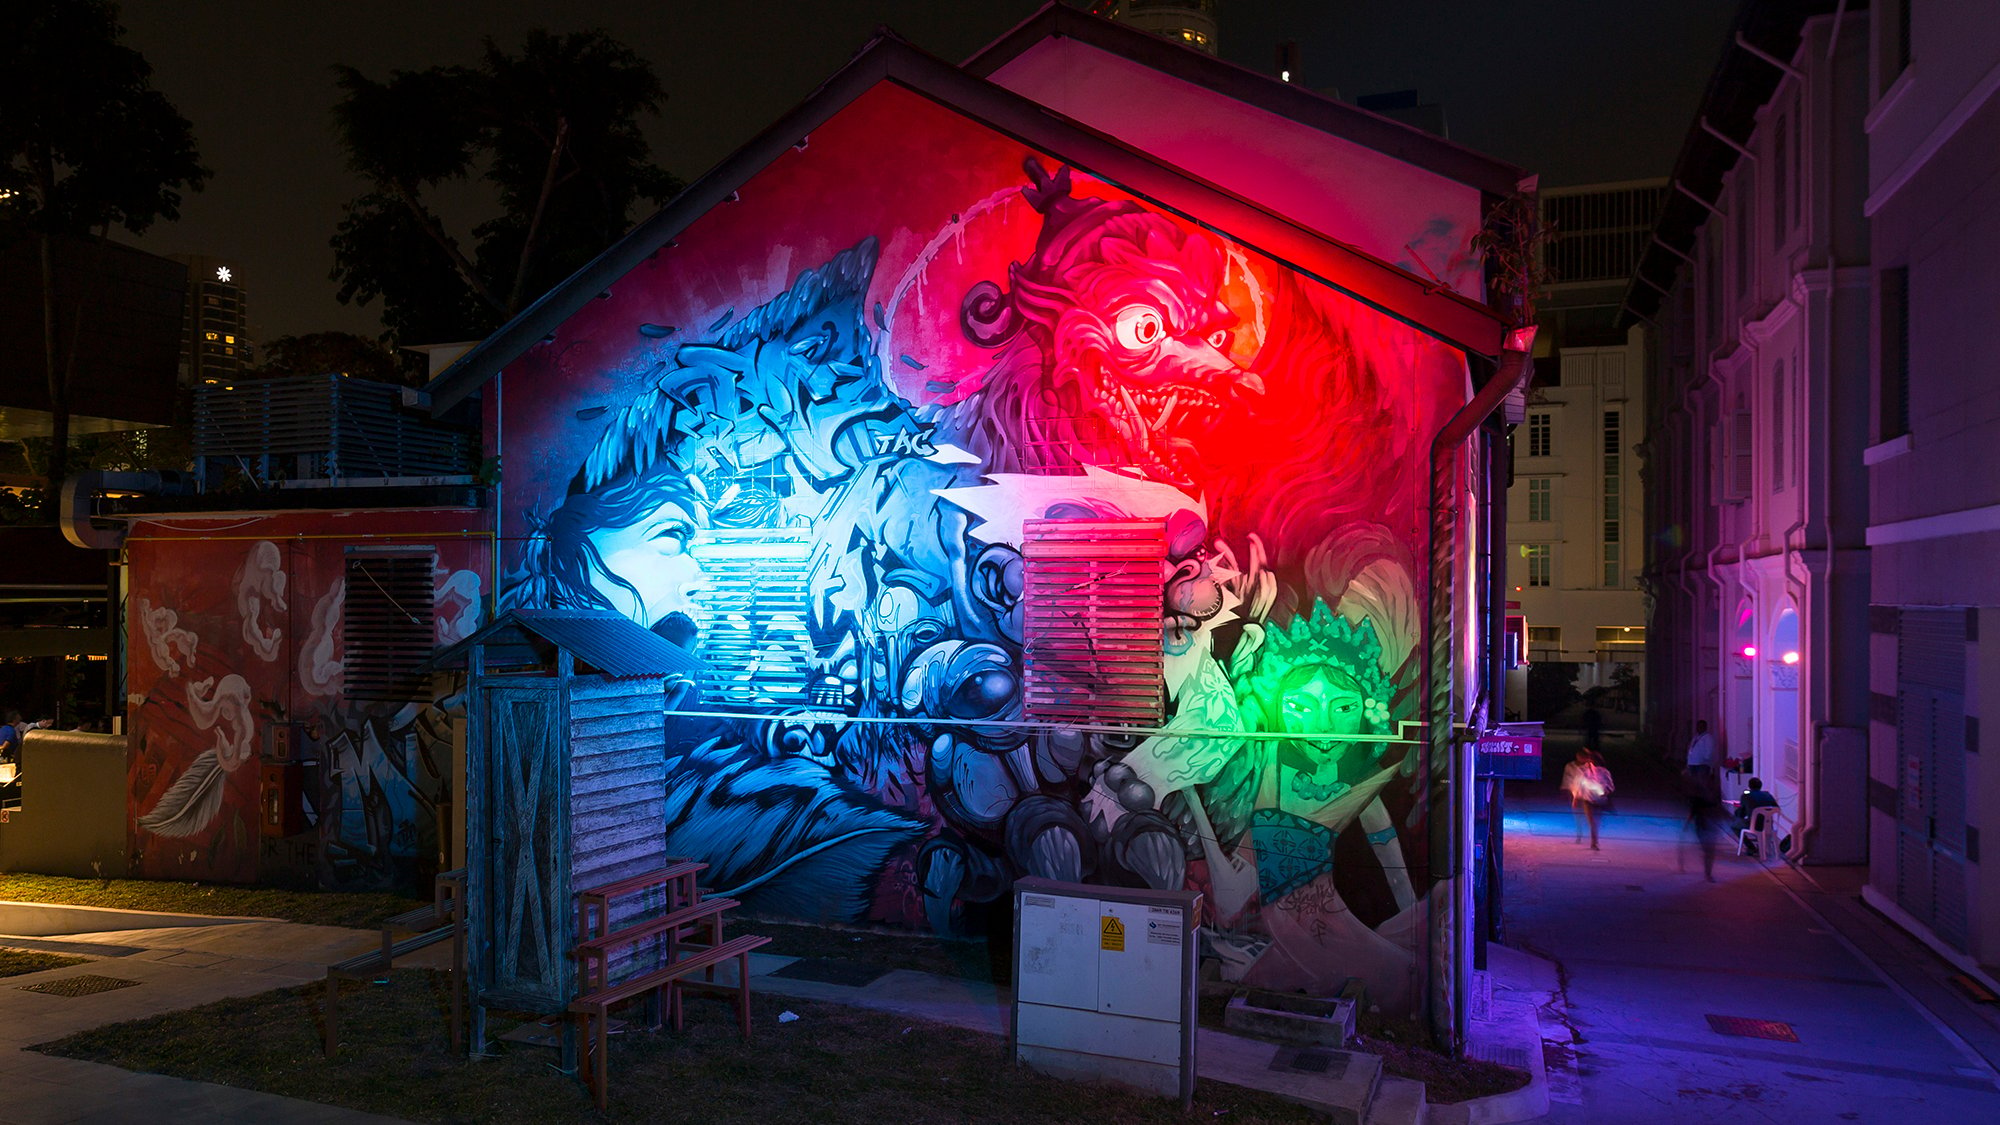 Night photo taken of the corner of a building covered in graffiti and lit up by coloured spotlights